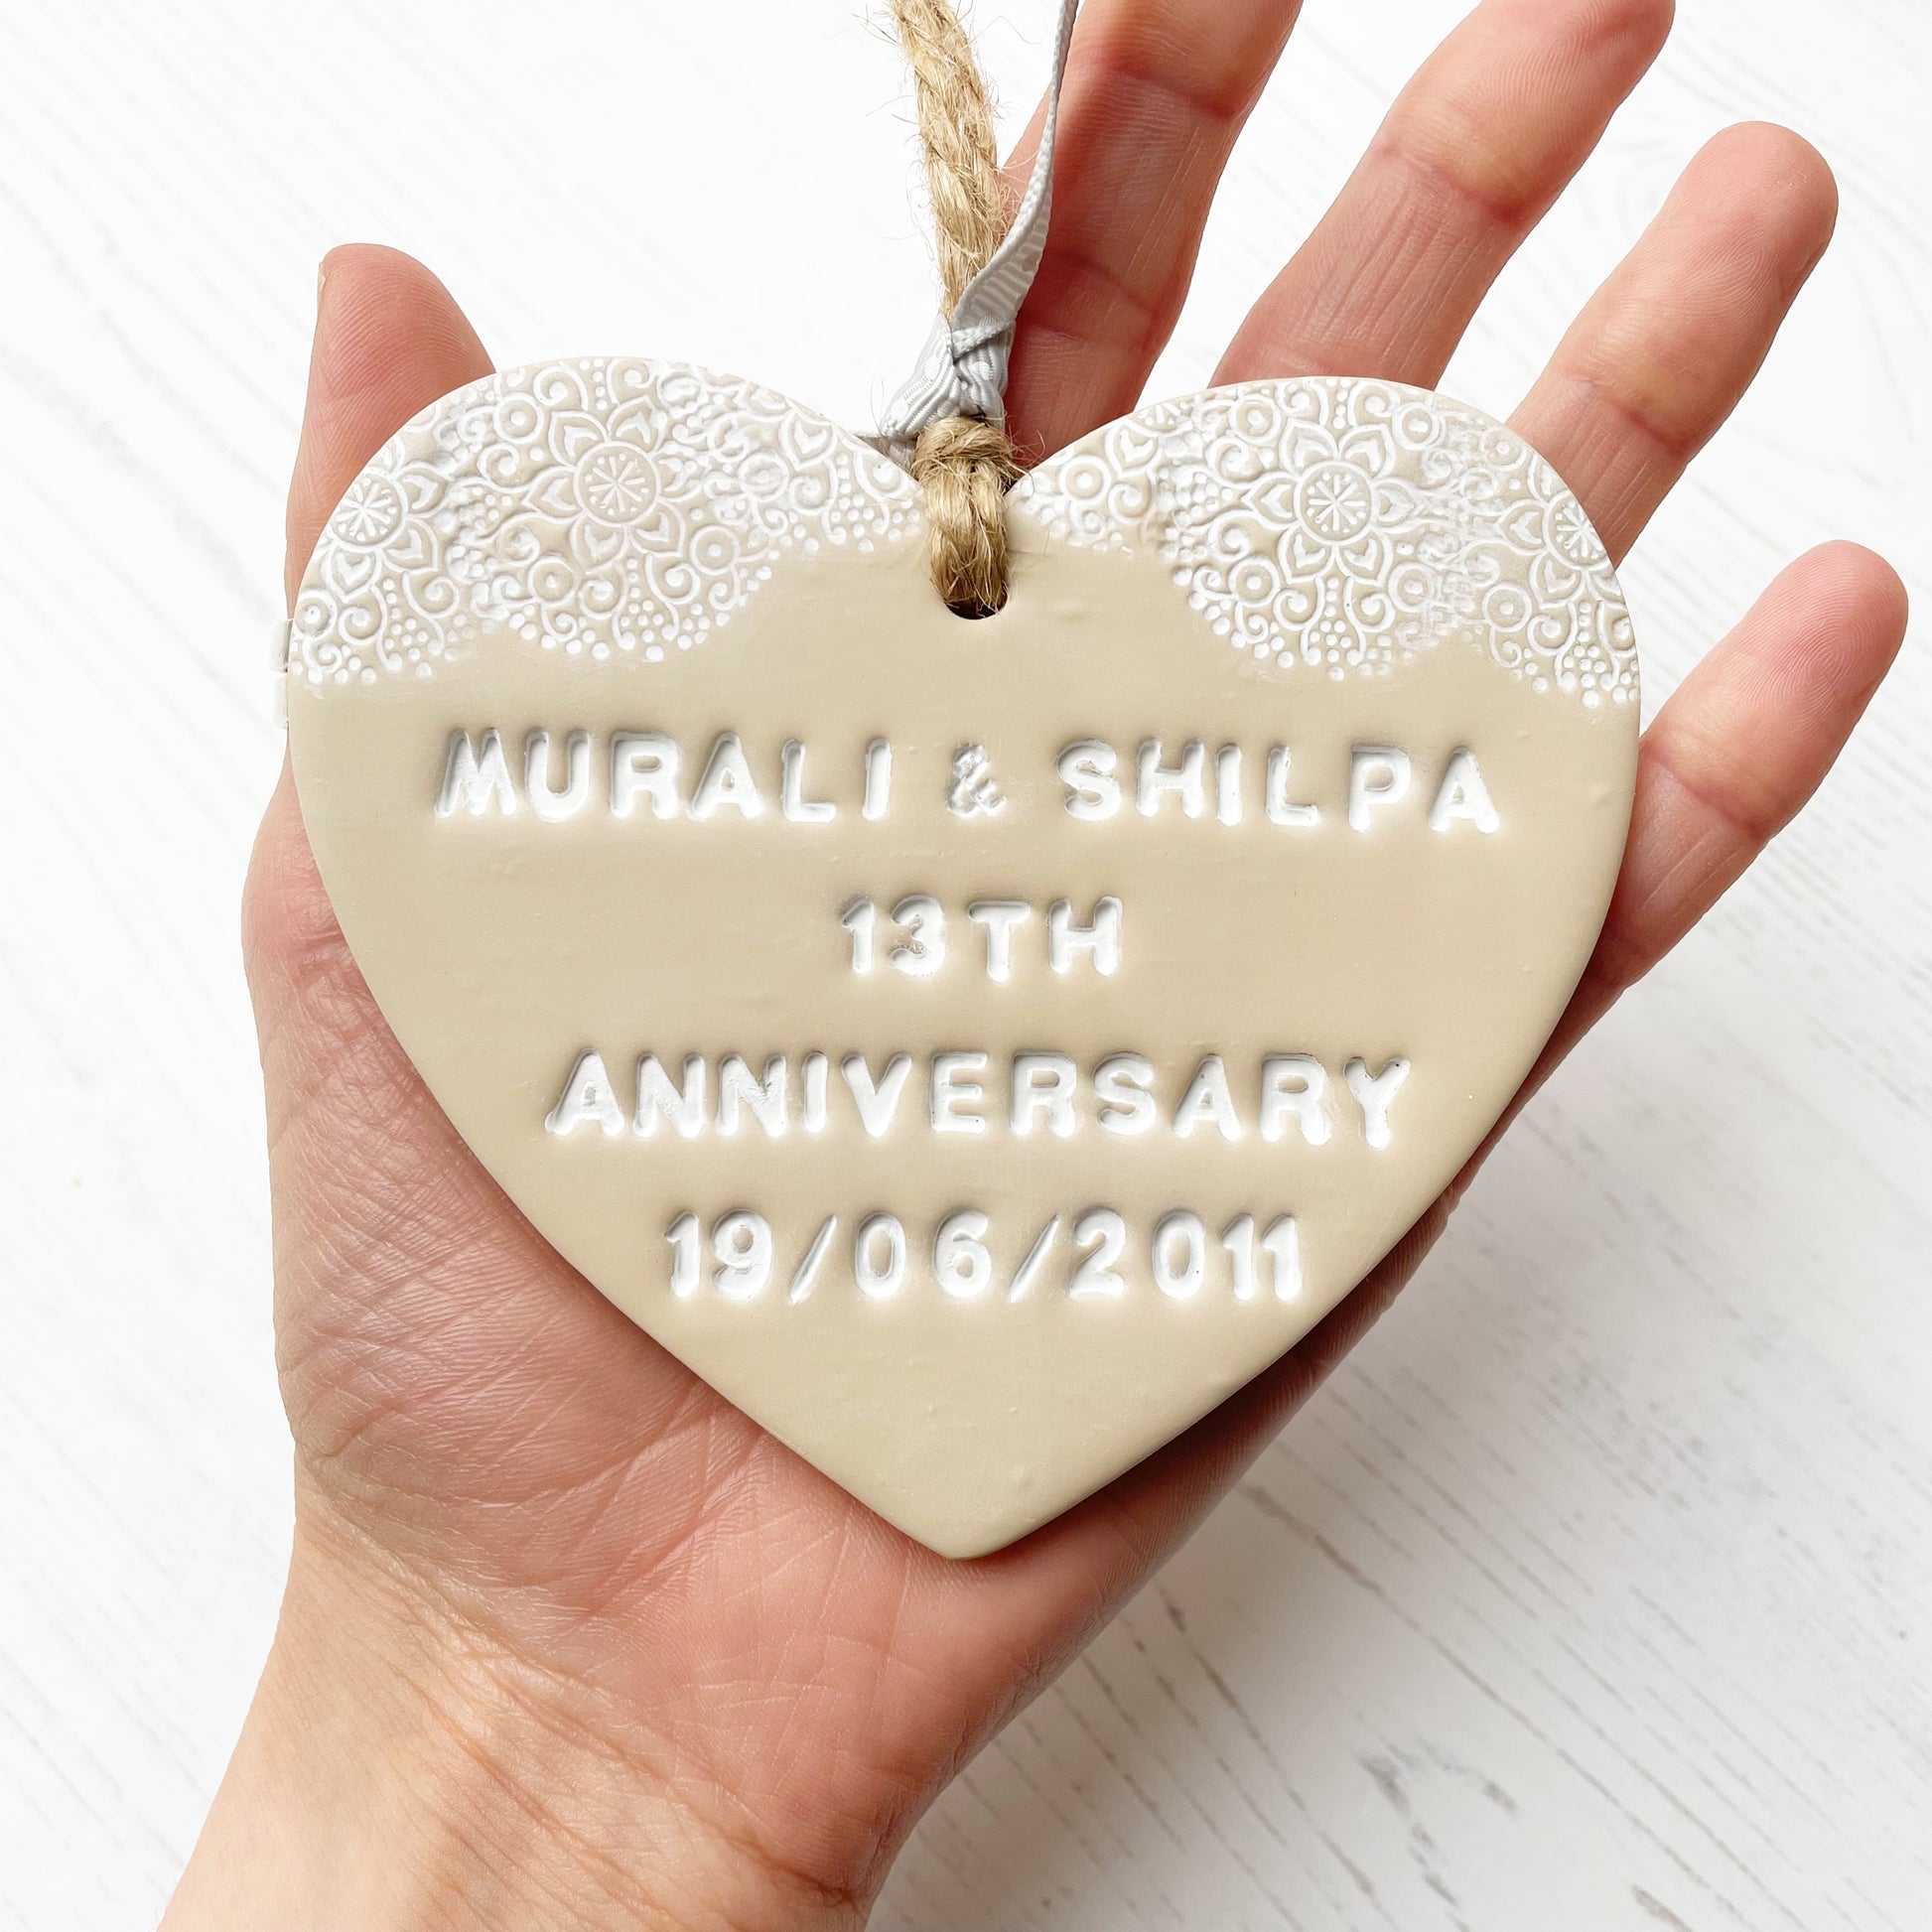 Personalised 13th anniversary gift, beige clay heart with a white lace edge at the top of the heart with jute twine for hanging, the heart is personalised with MURALI & SHILPA 13TH ANNIVERSARY 19/06/2011